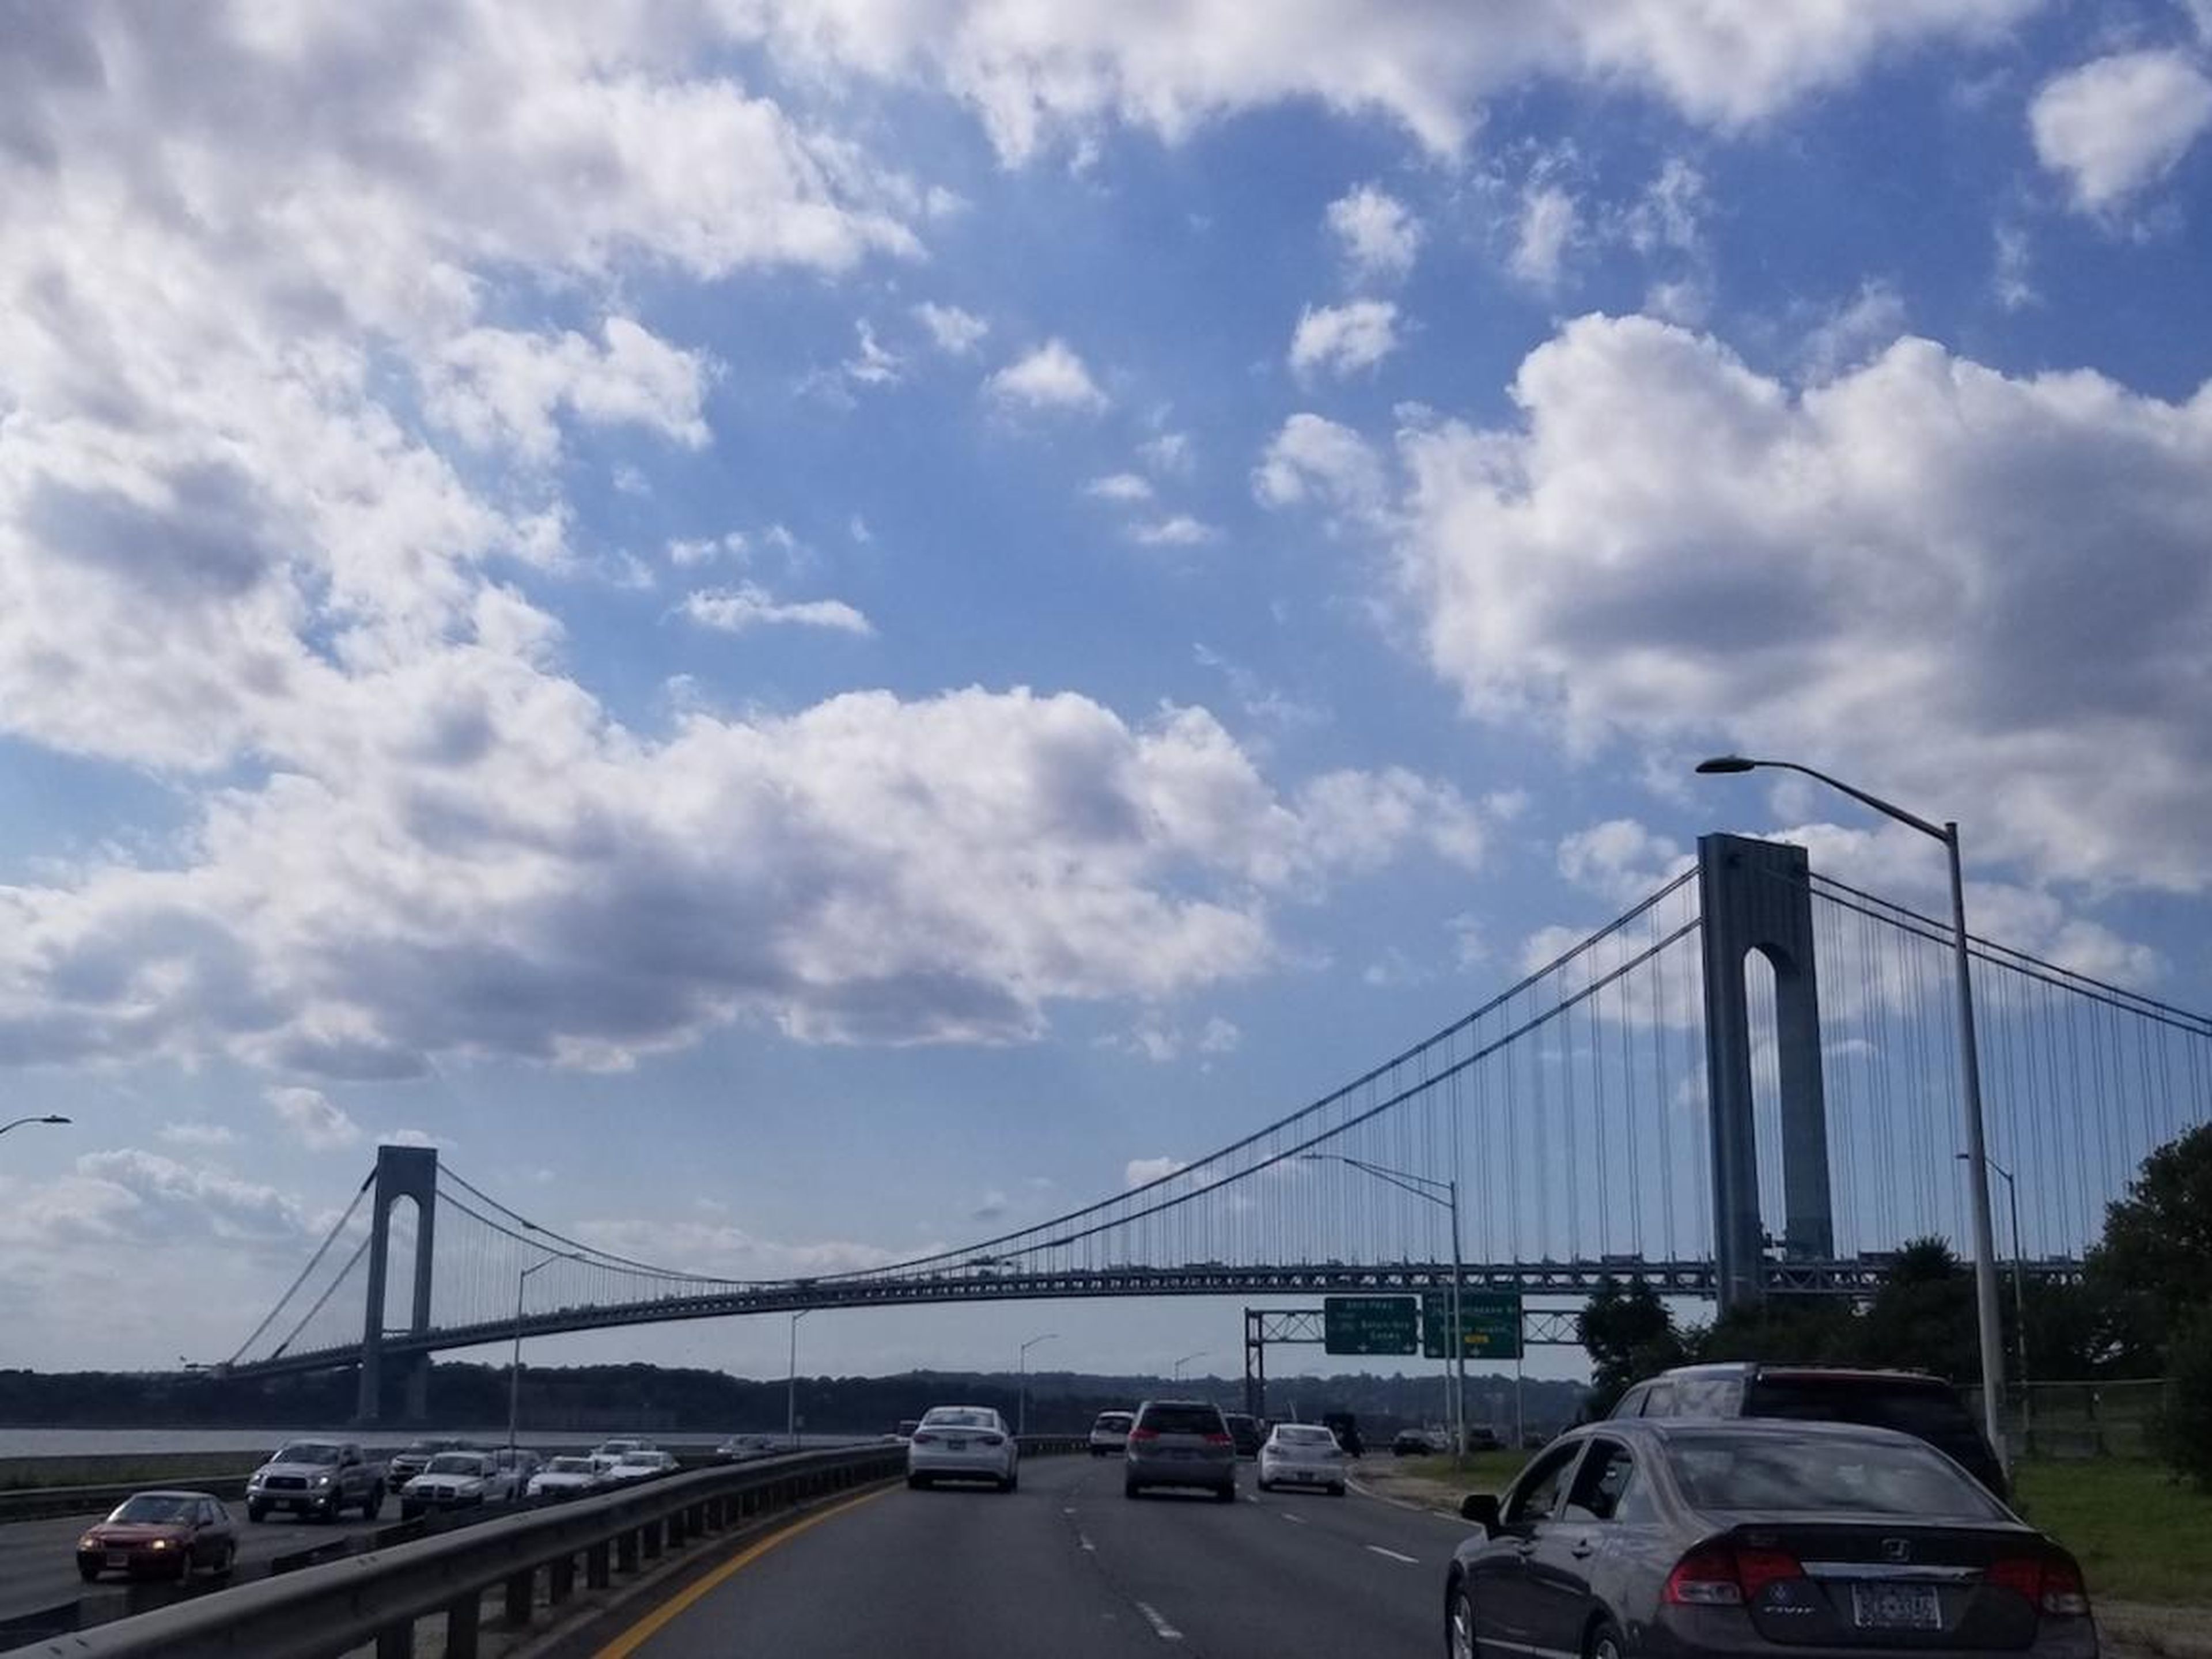 At 2:15 p.m., Sabatier and Robin tire of walking and drive into Manhattan. They take the long route to soak up the water views.